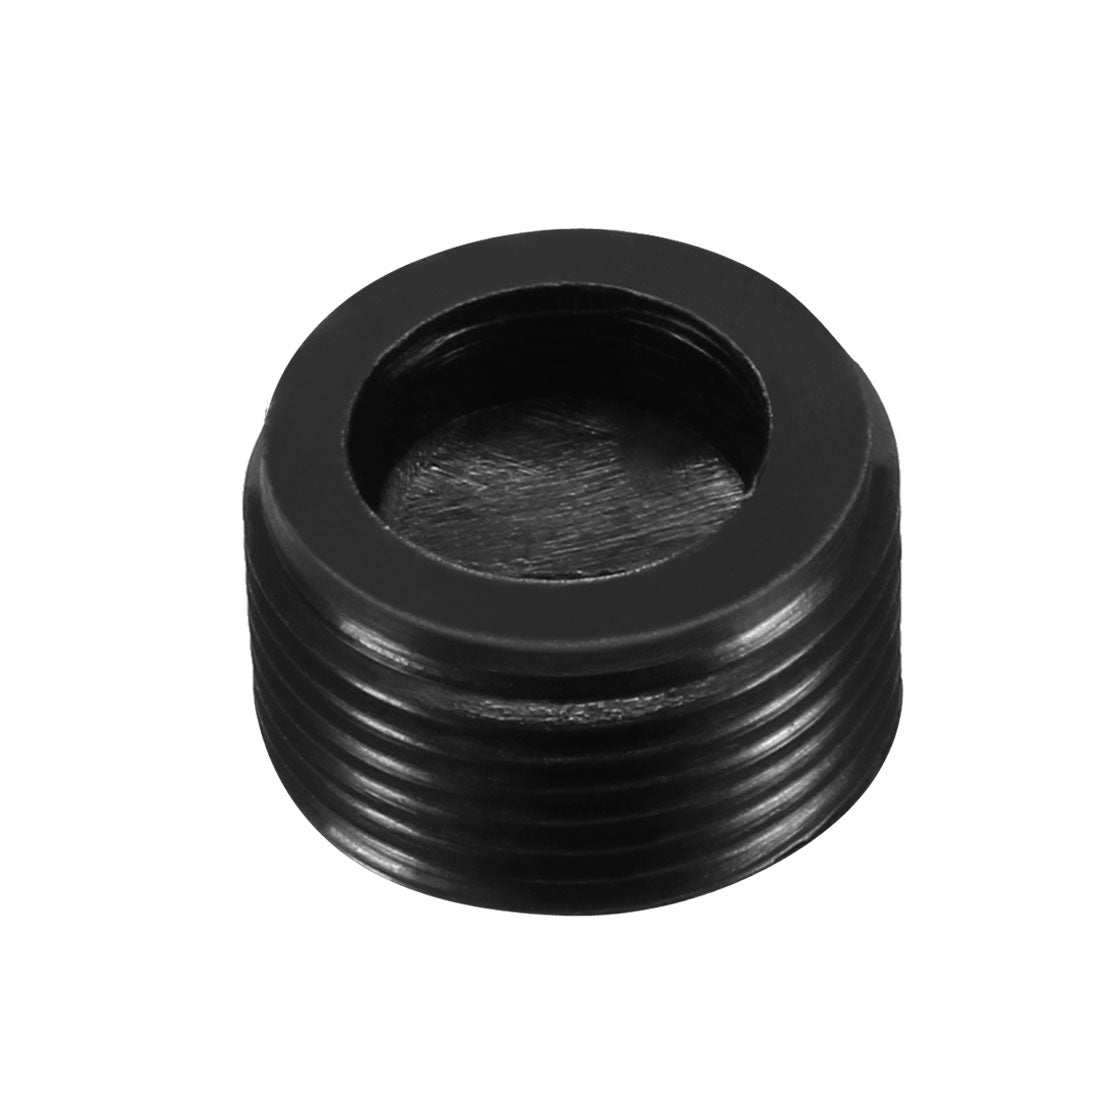 uxcell Uxcell Carbon Brush Holder Caps 15mm O.D. 9mm I.D. 8mm Thickness Motor Brush Cover Plastic Fitting Thread Black 20pcs